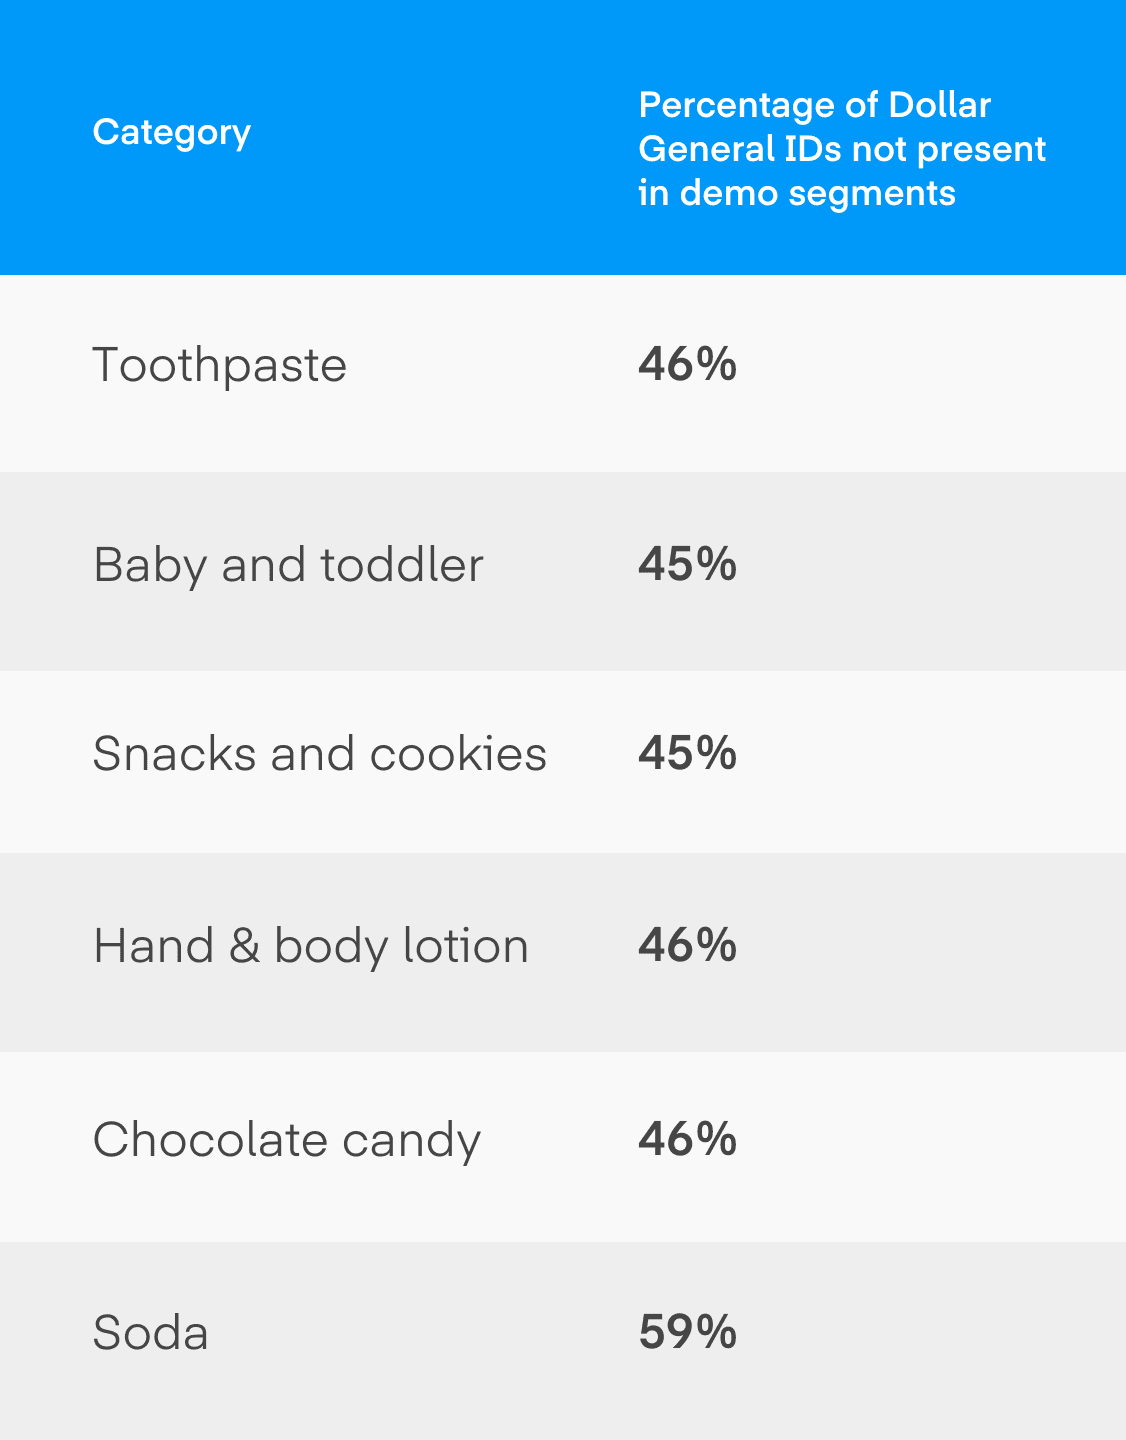 Chart shows break down of Dollar General's largest segments, including Toothpaste, Baby and Toddler, Snacks and Cookies, Hand and Body Lotion, Chocolate Candy, and Soda.